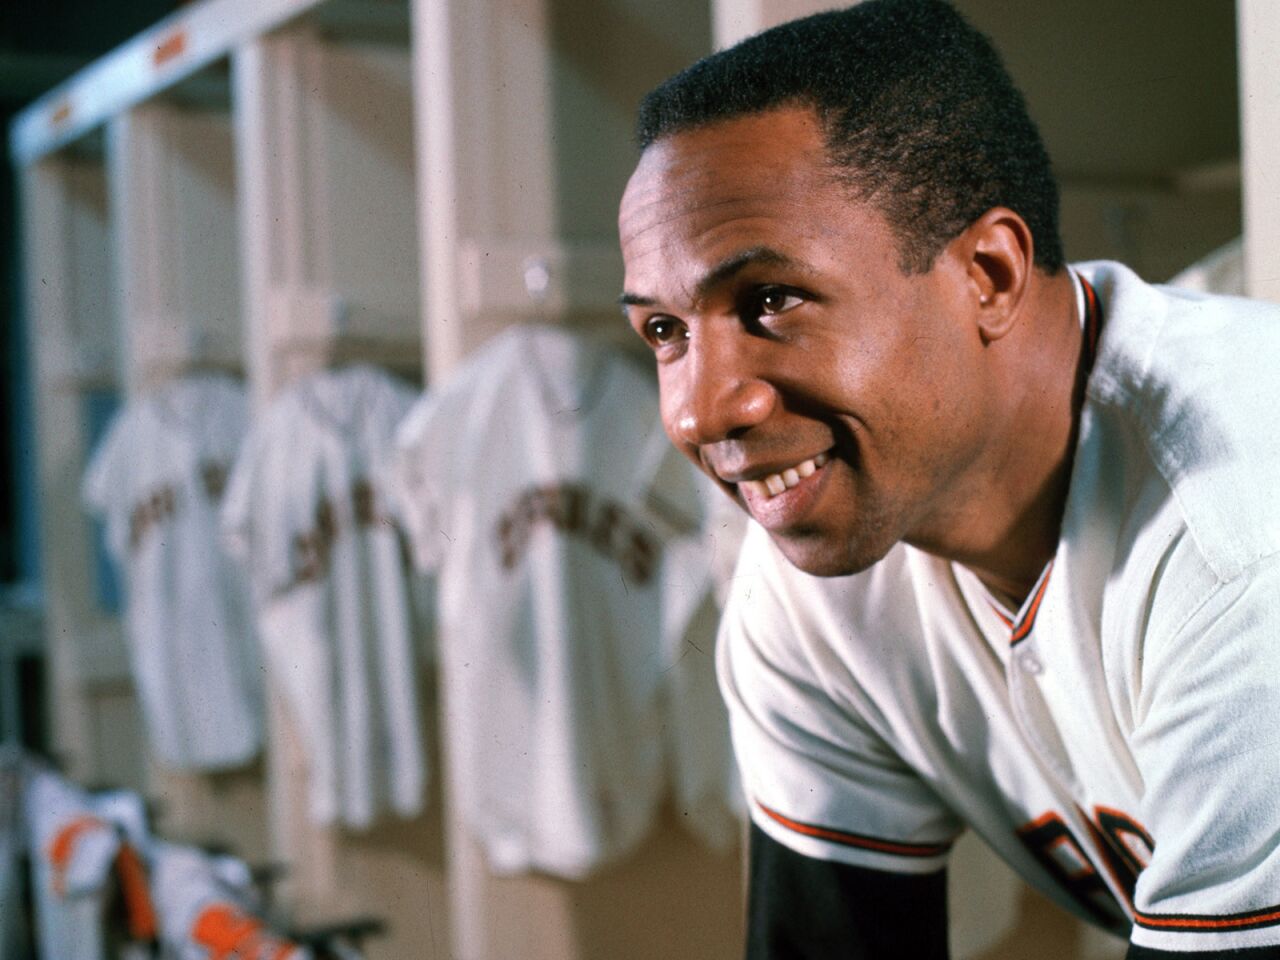 Hall of Fame outfielder Frank Robinson was the only major leaguer to be named most valuable player in both the National and American leagues. One of baseball's most feared sluggers, he became the first African American to manage in the big leagues in 1975, when he filled that position for the Cleveland Indians. He was 83.